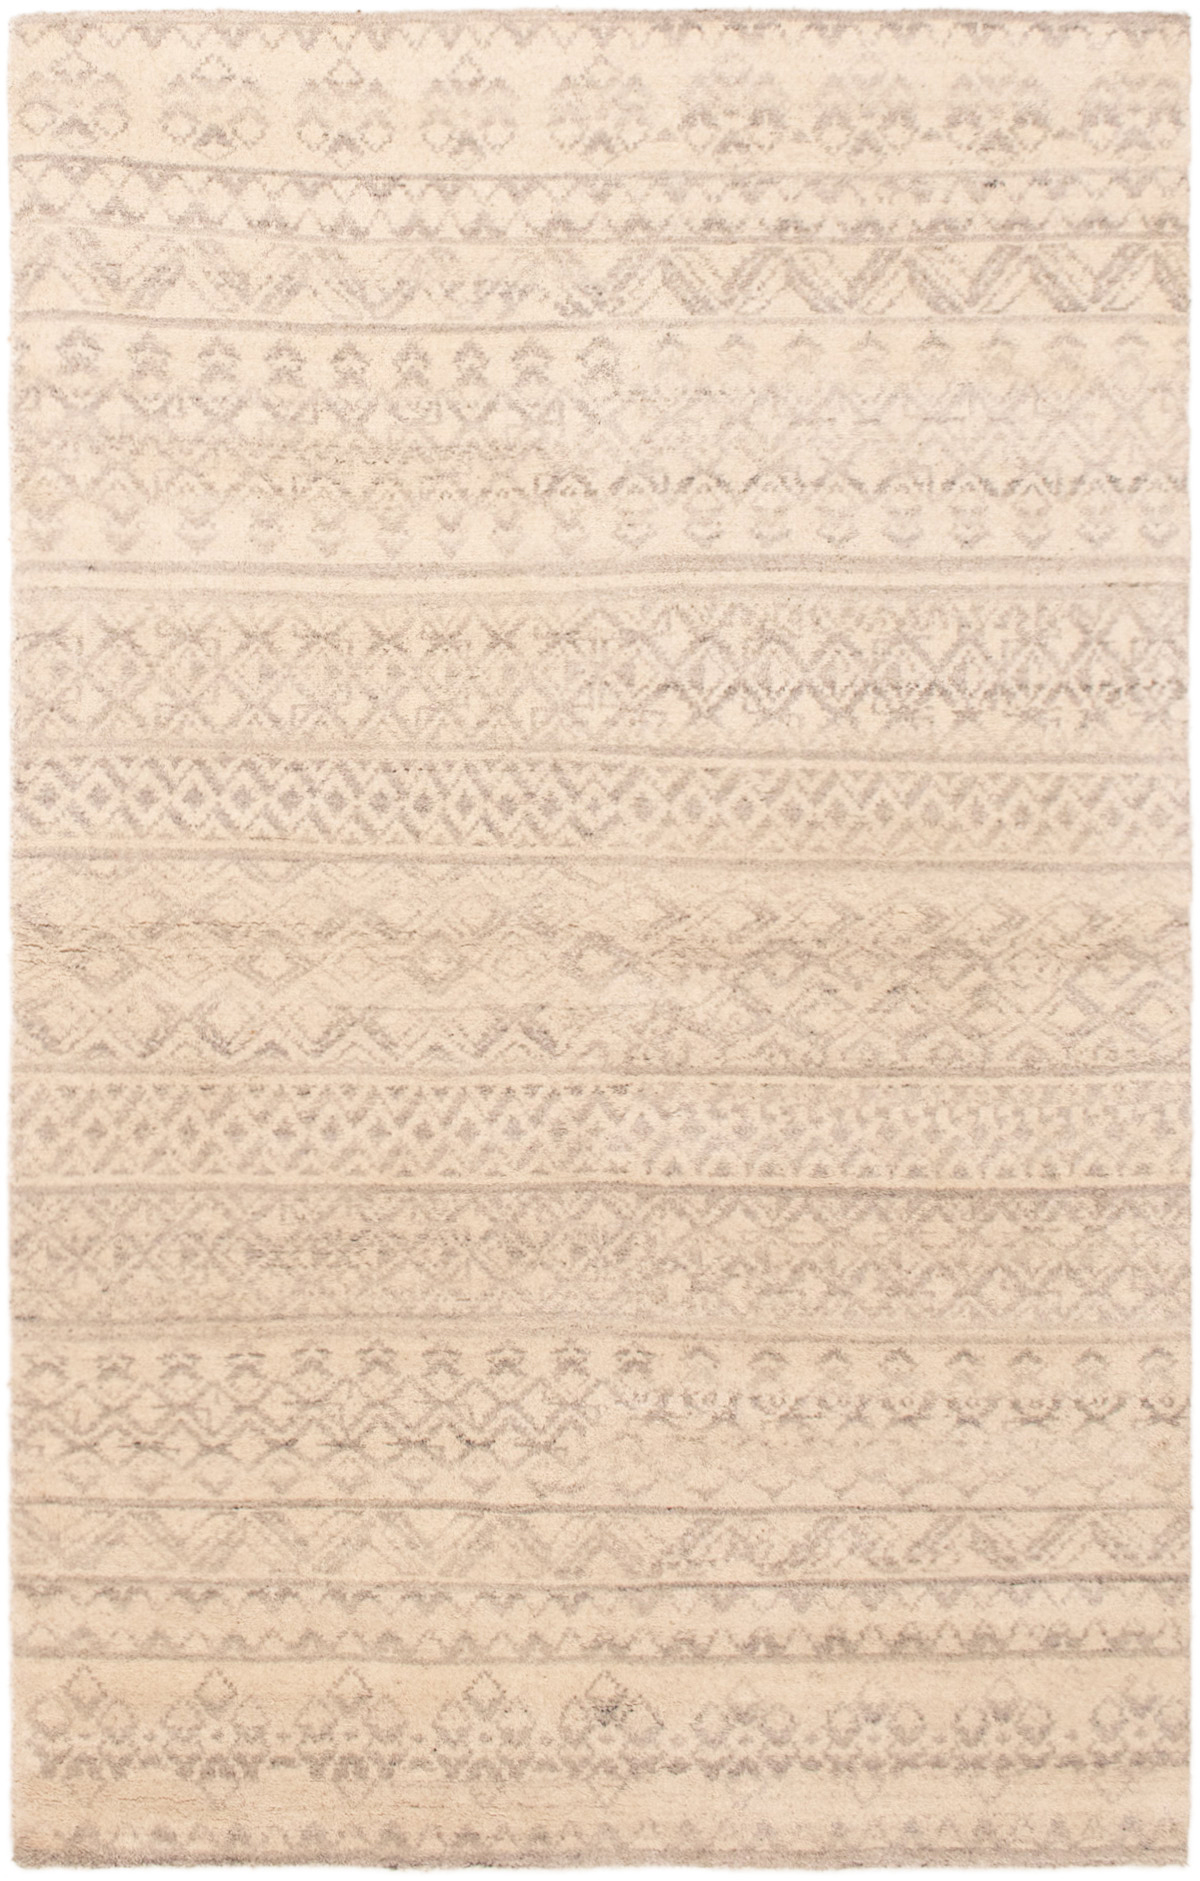 Hand-knotted Tangier Cream Wool Rug 4'11" x 7'10" Size: 4'11" x 7'10"  